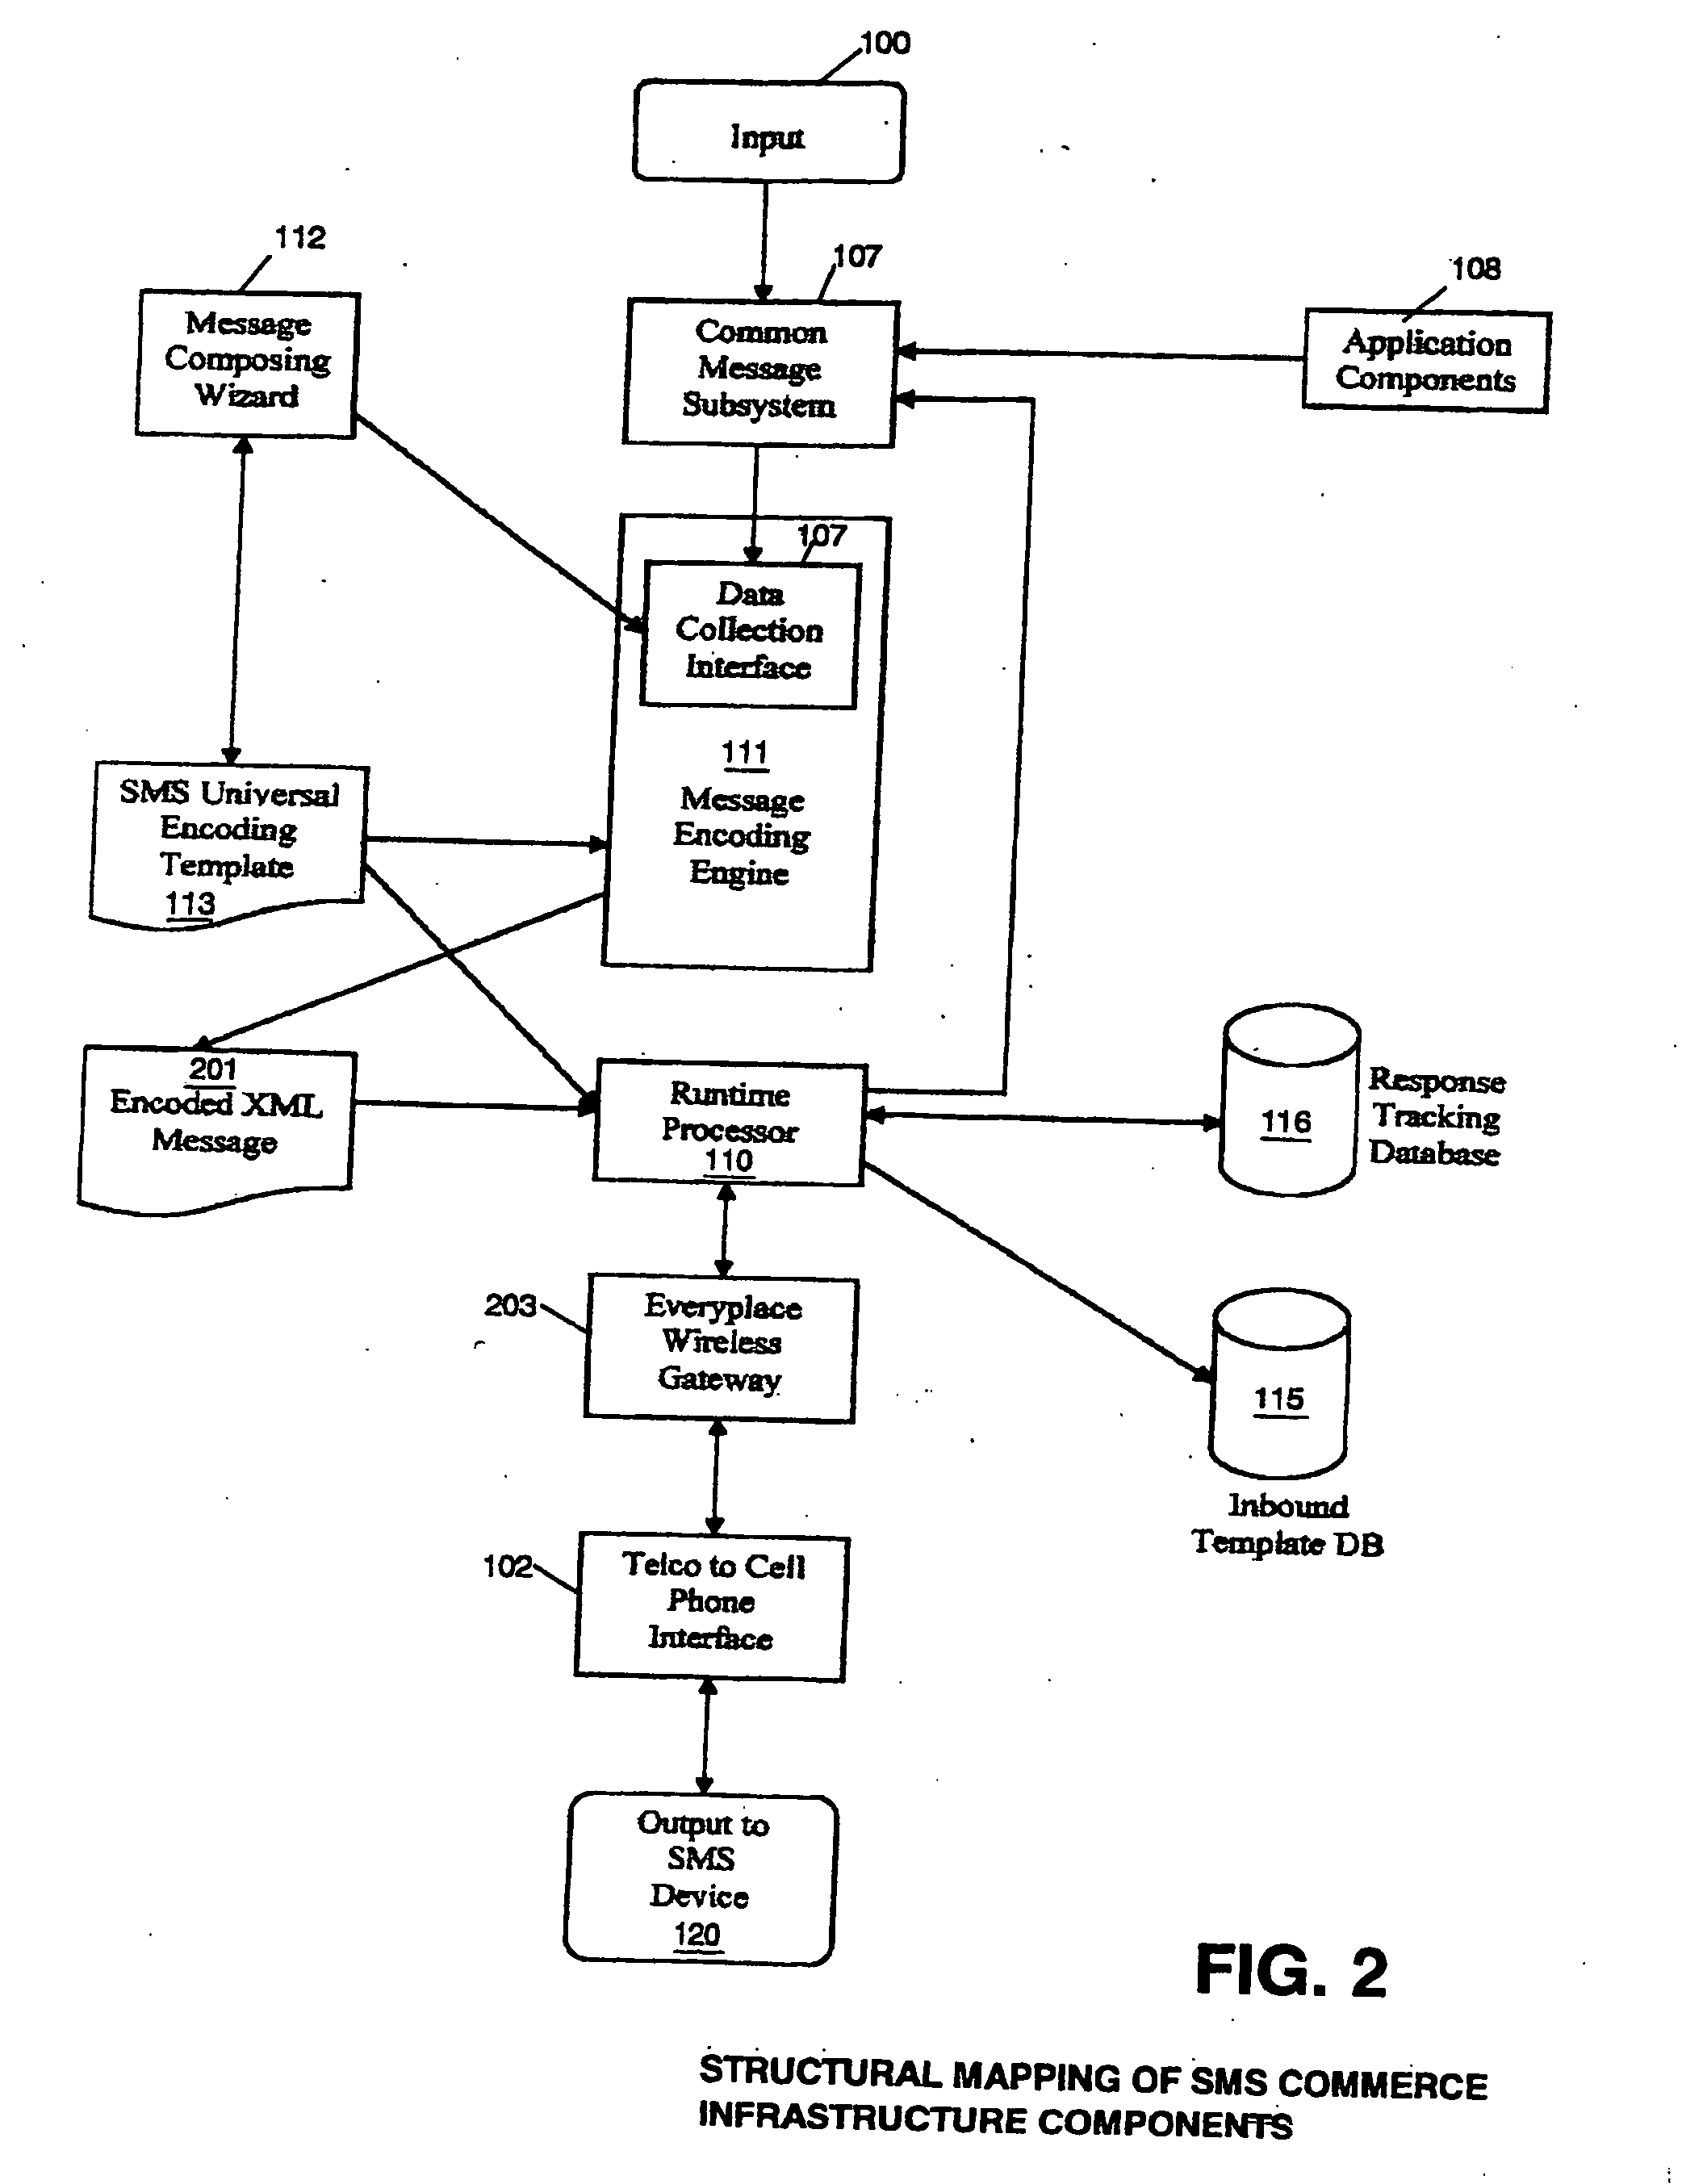 Method and apparatus for an e-commerce message using sms